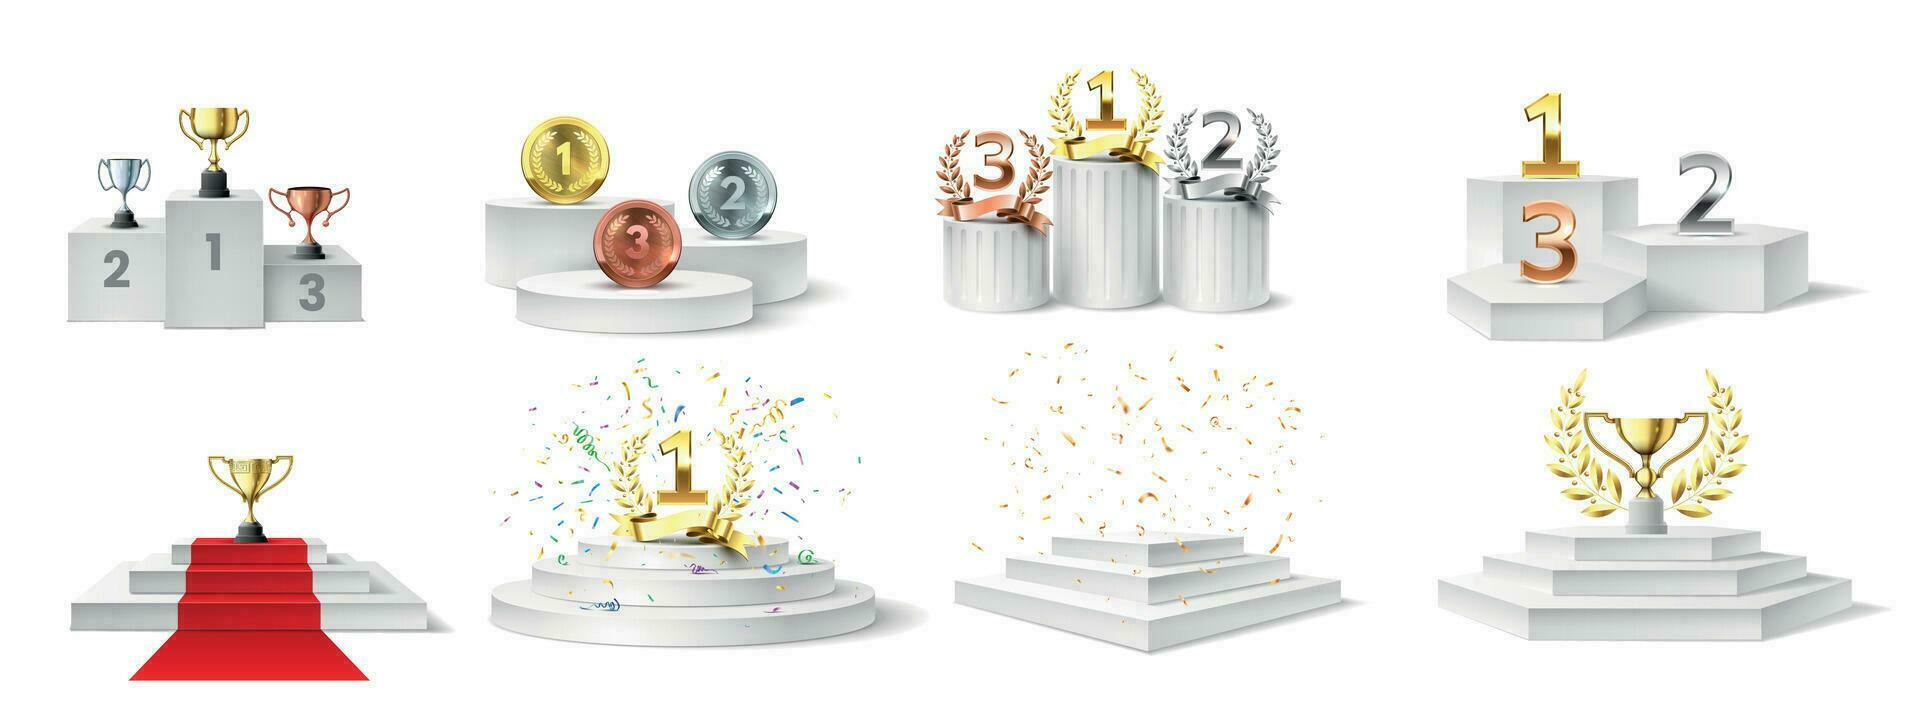 Winner podium, medal and cups. Trophies on illuminated podium for ceremony award, prizes on stair-steps pedestal, realistic vector set